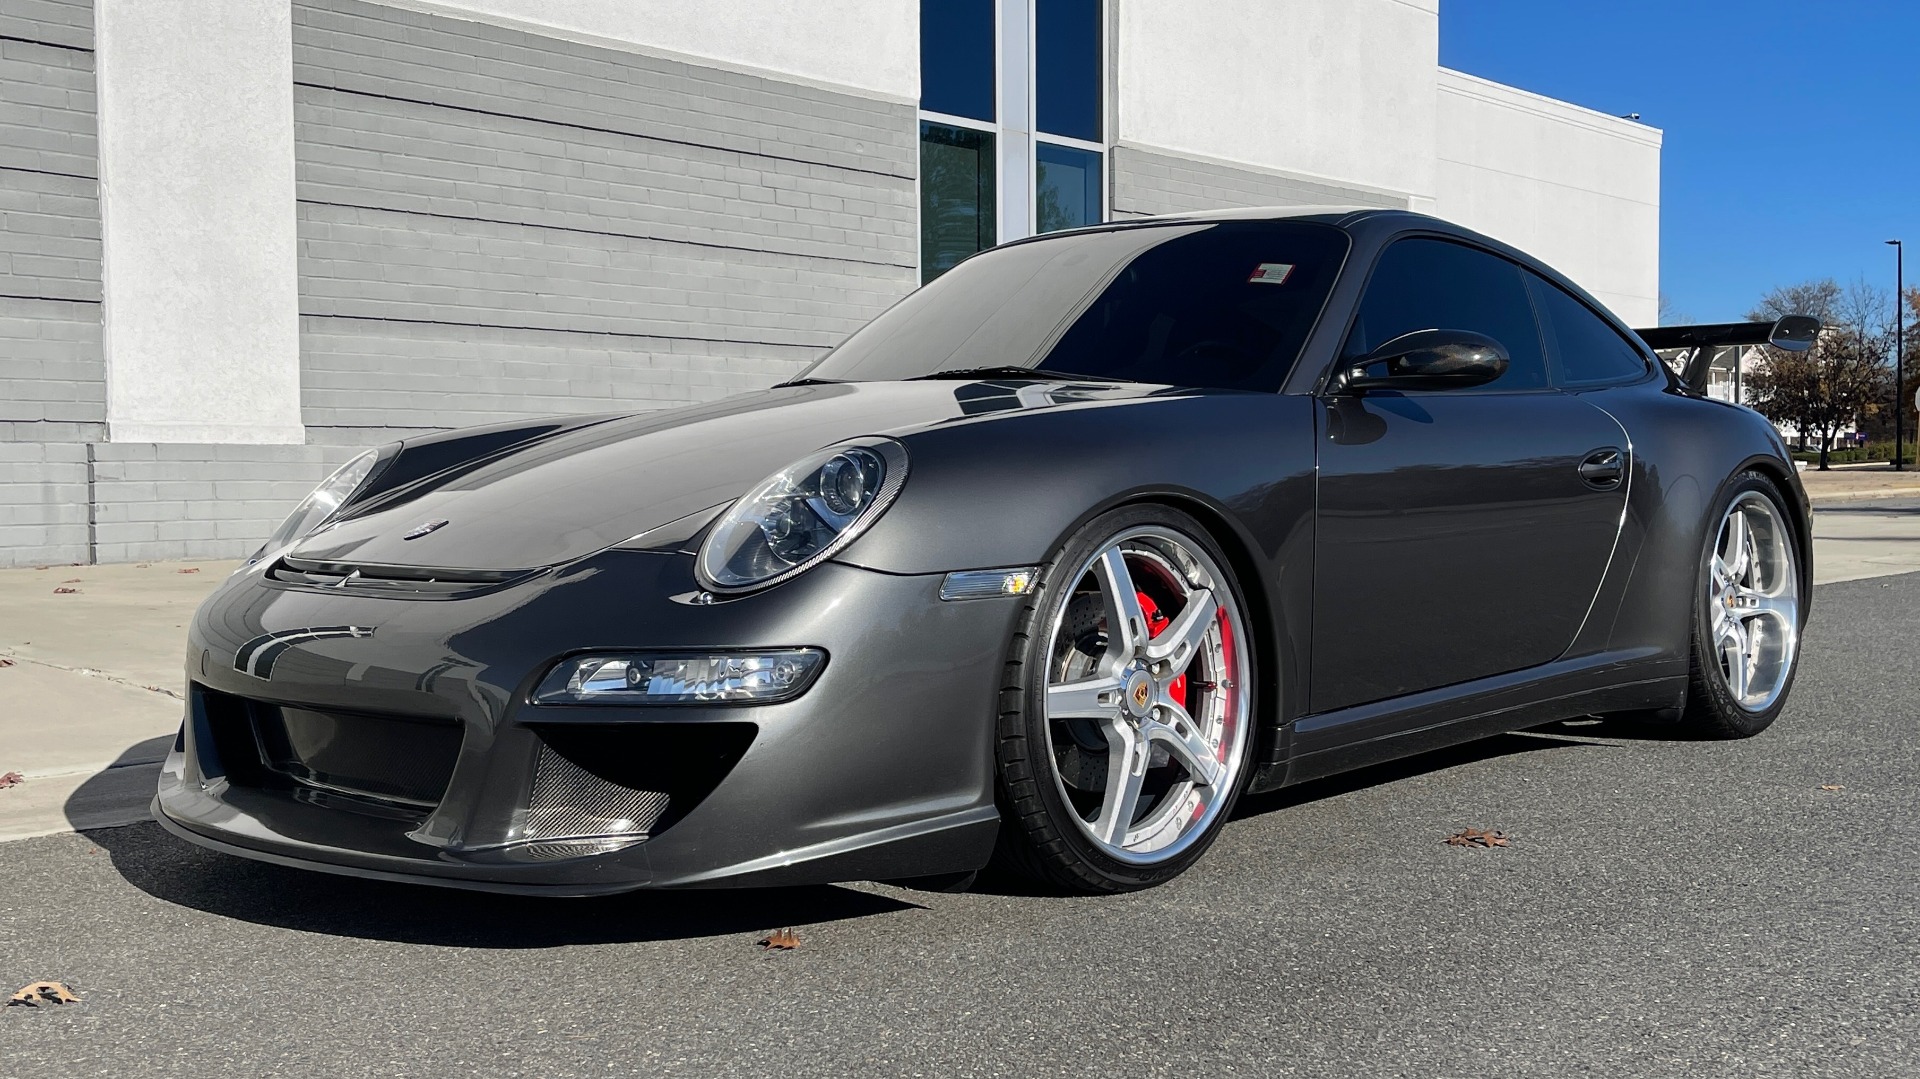 Used 2007 Porsche 911 CARRERA 4S / 3.8L H6 / 6-SPD MANUAL / HTD STS / SPORT CHRONO / BODY KIT for sale Sold at Formula Imports in Charlotte NC 28227 2